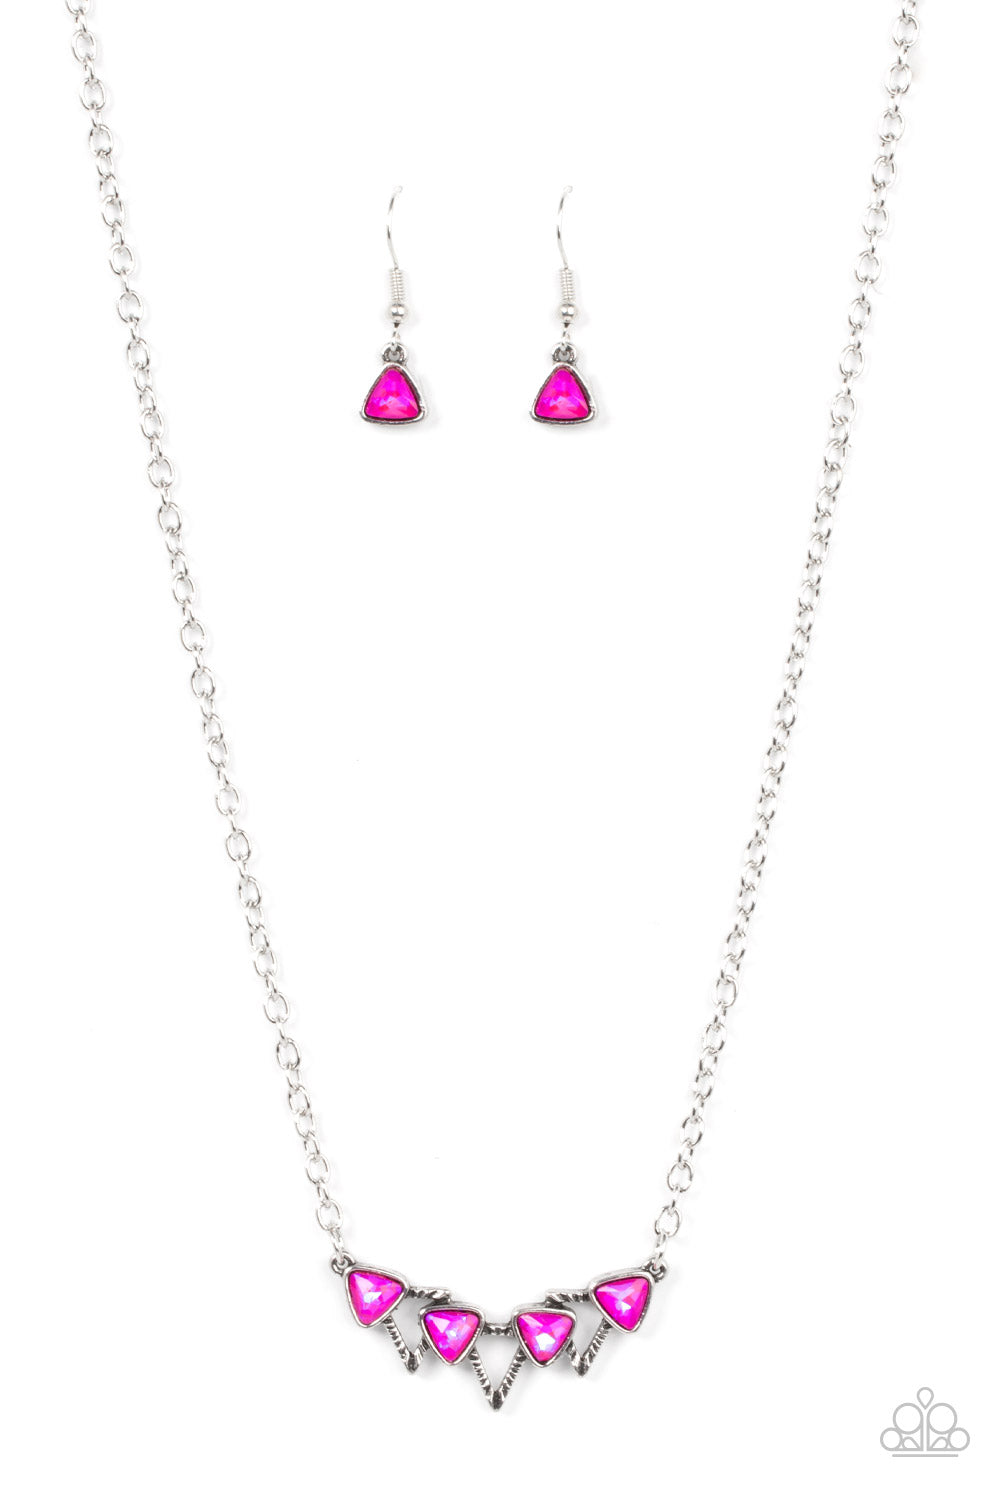 five-dollar-jewelry-pyramid-prowl-pink-necklace-paparazzi-accessories